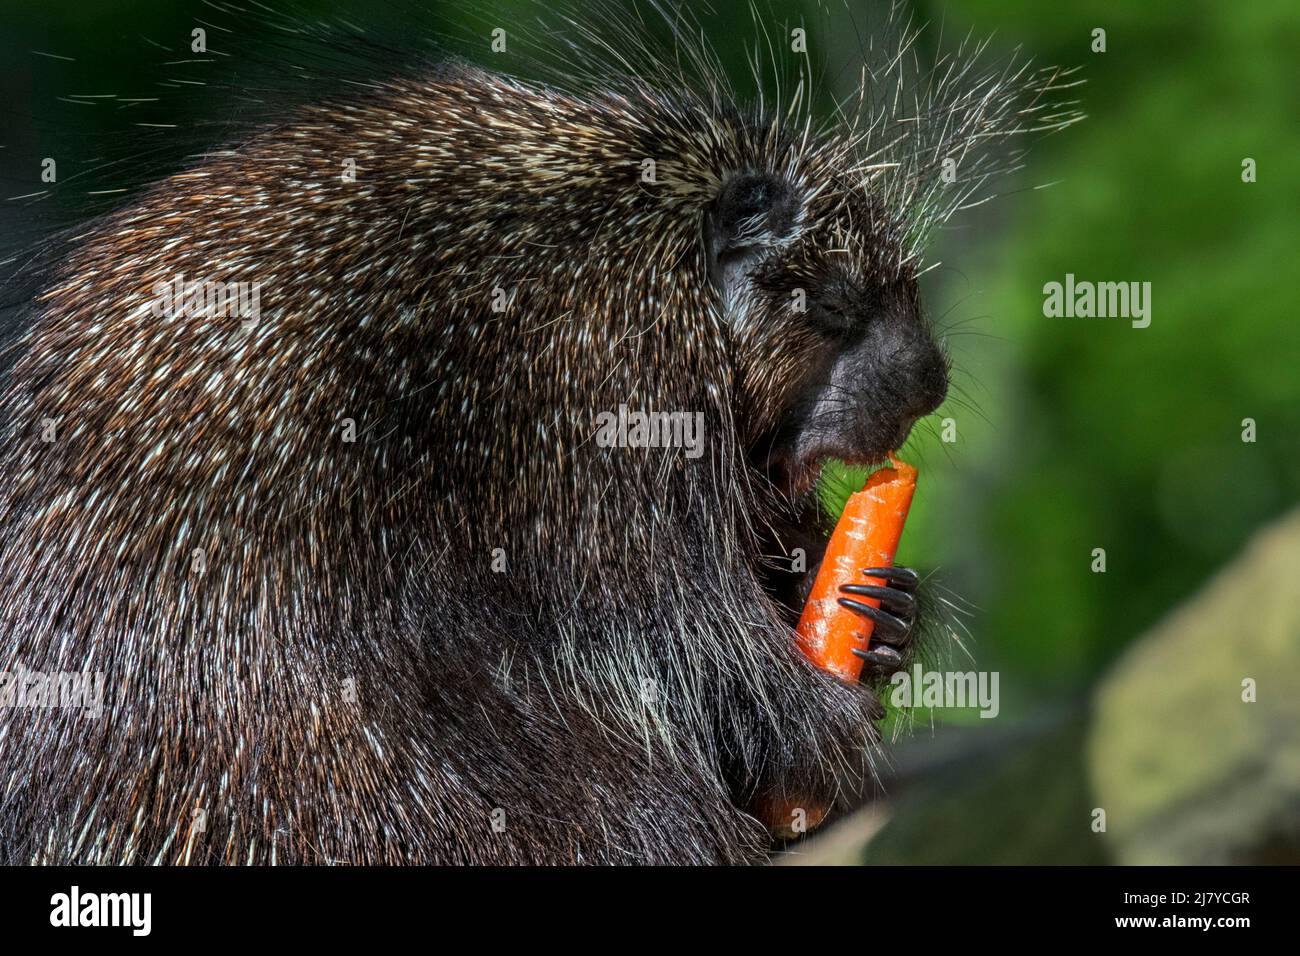 North American porcupine / Canadian porcupine (Erethizon dorsatum) eating carrot in zoo, native to North America Stock Photo